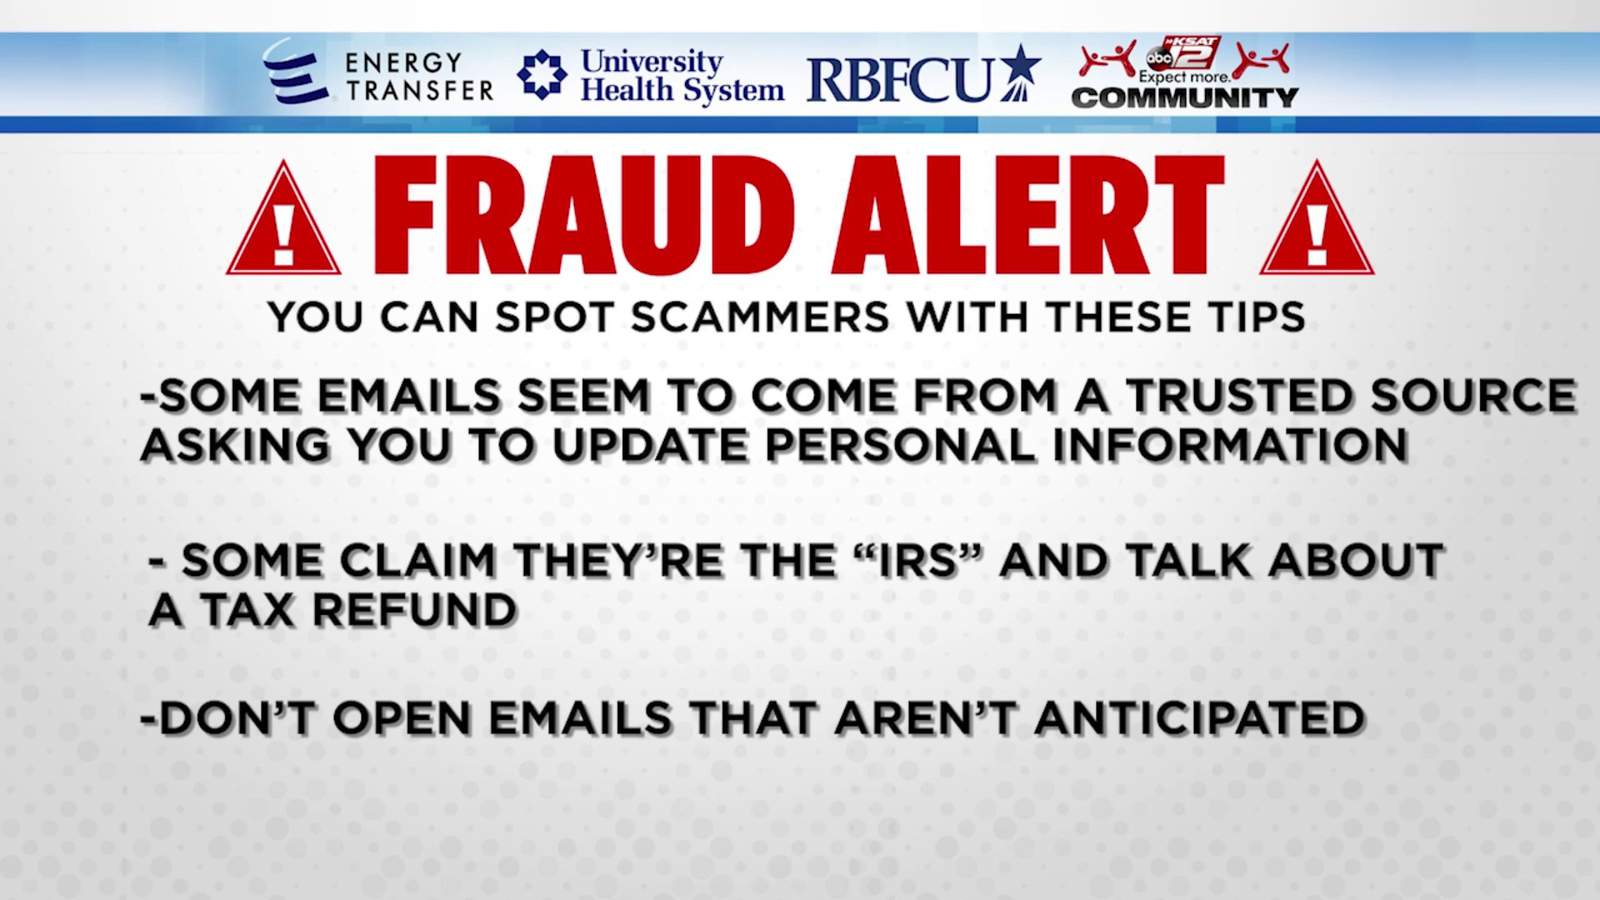 RBFCU provides tips on how to spot phishing, Medicare scams and charity scams